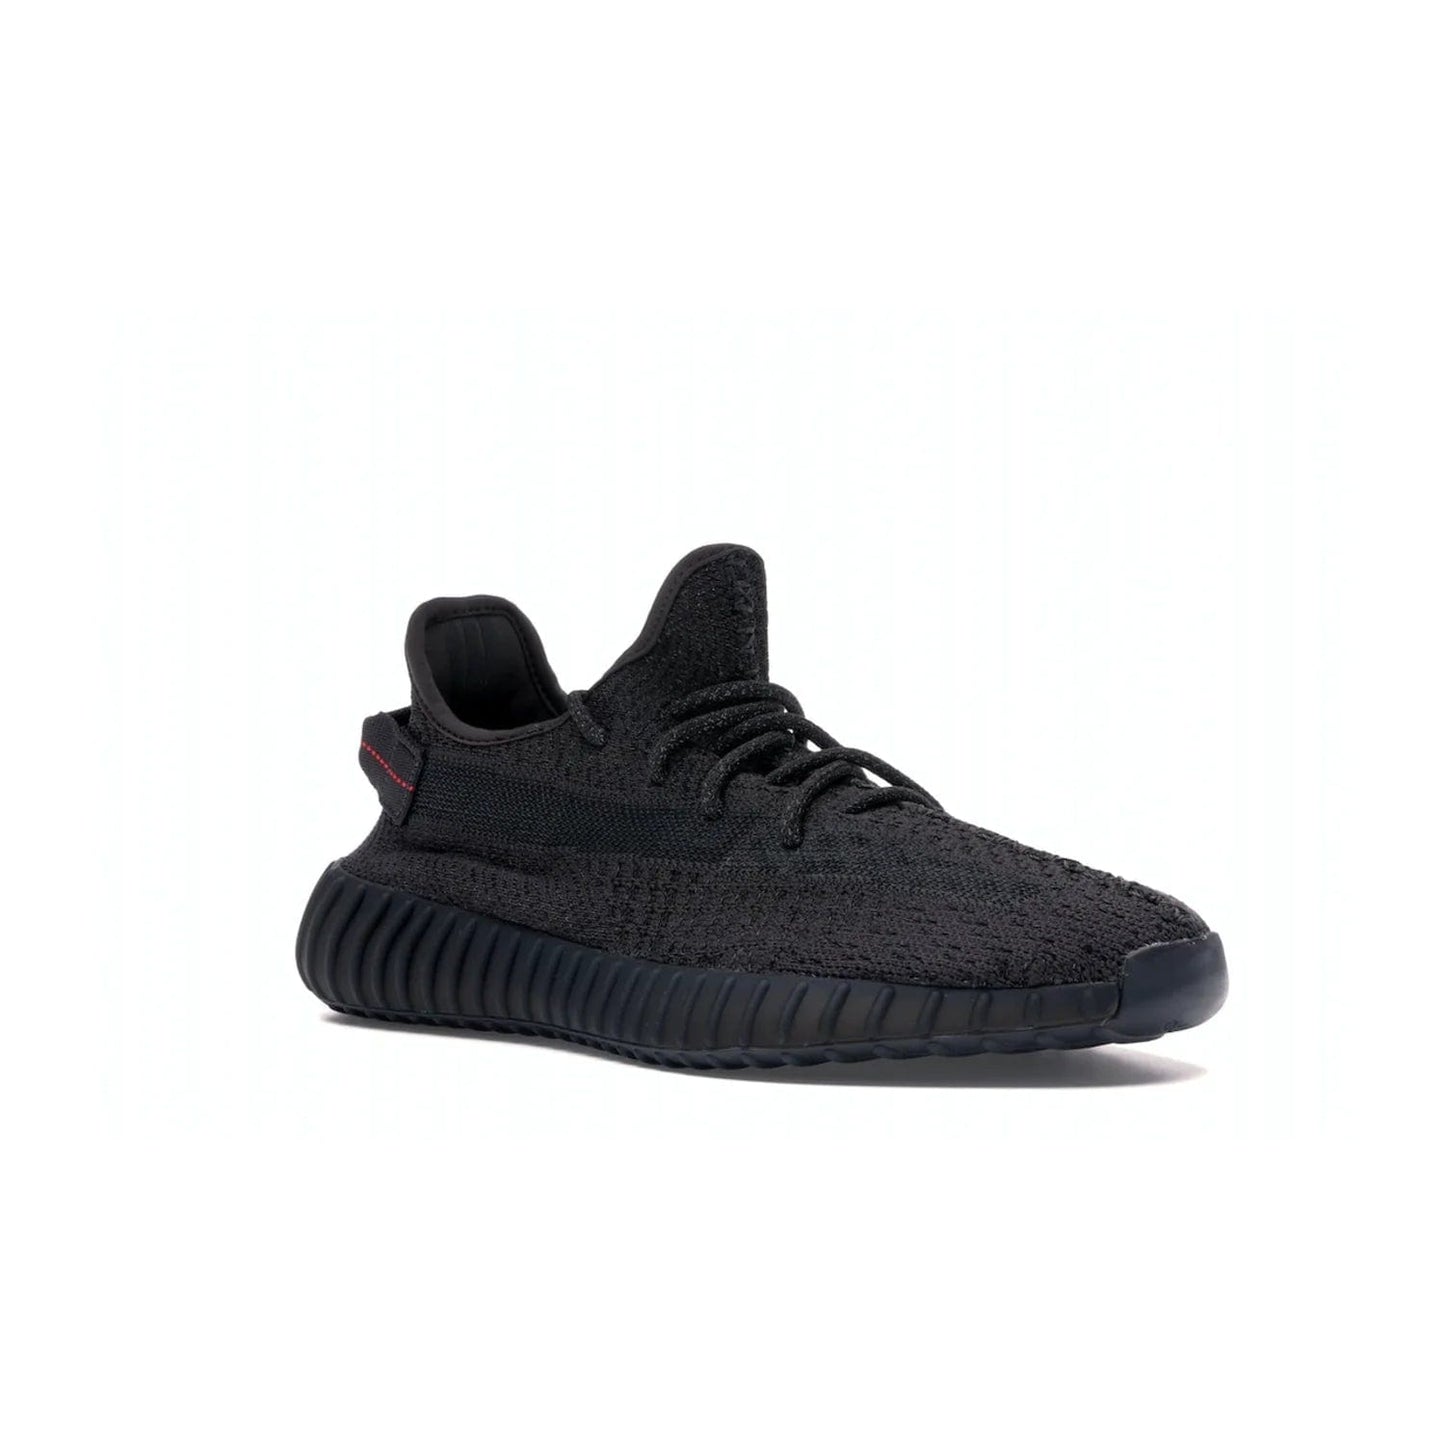 adidas Yeezy Boost 350 V2 Static Black (Reflective) - Image 5 - Only at www.BallersClubKickz.com - Make a statement with the adidas Yeezy Boost 350 V2 Static Black Reflective. All-black upper, reflective accents, midsole, and sole combine for a stylish look. High quality materials. June 2019 release. Add to your collection today.